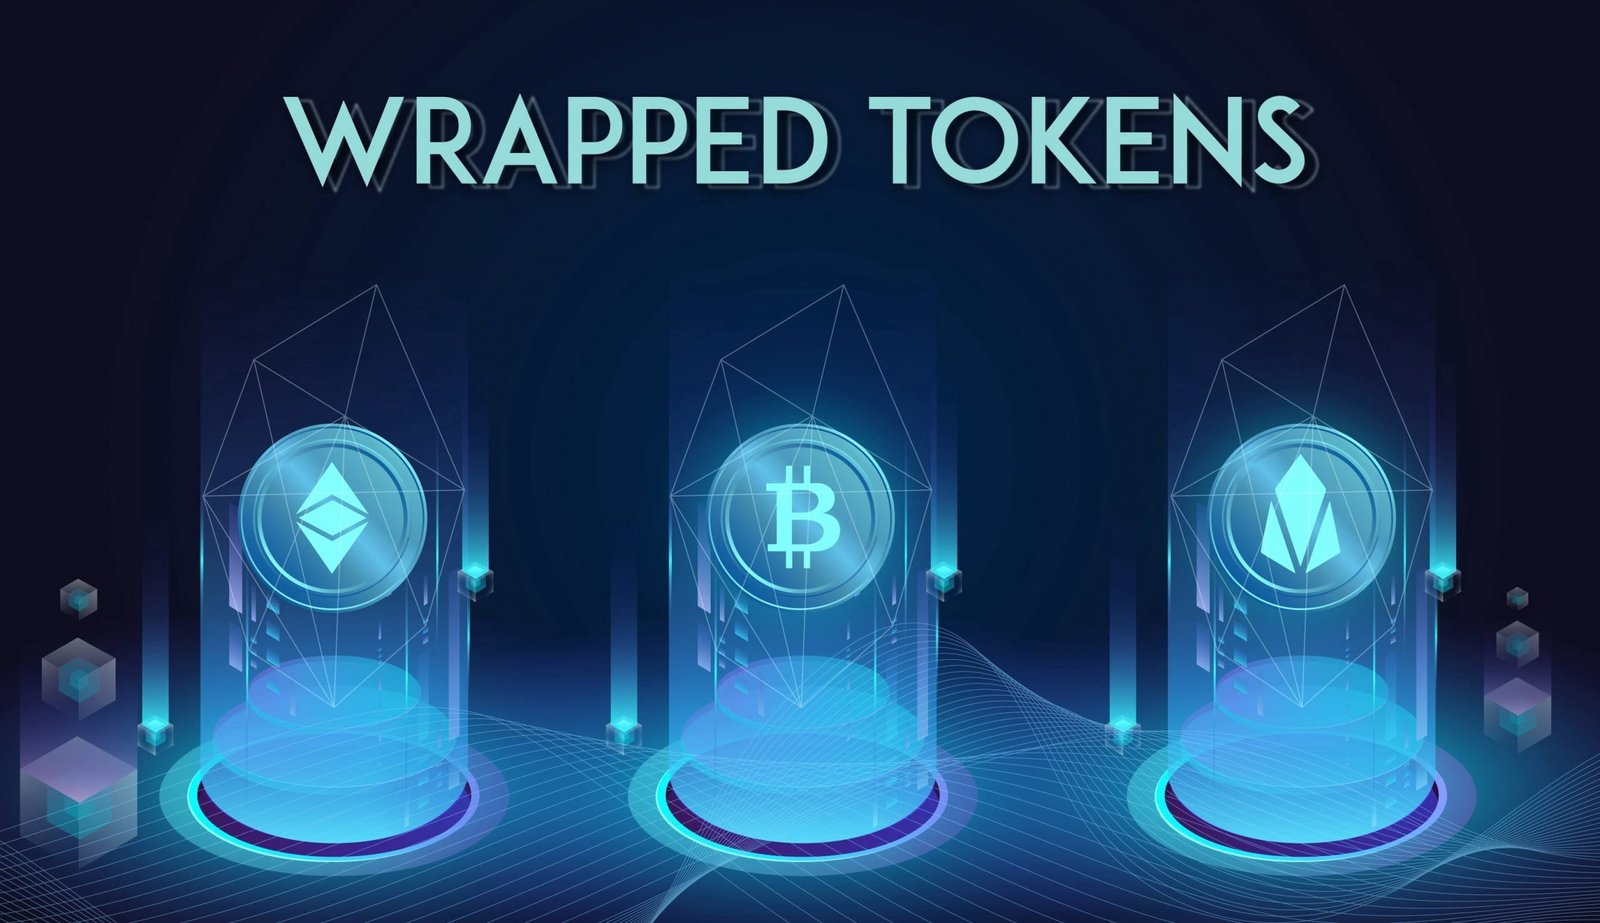 wrapped-tokens.jpeg